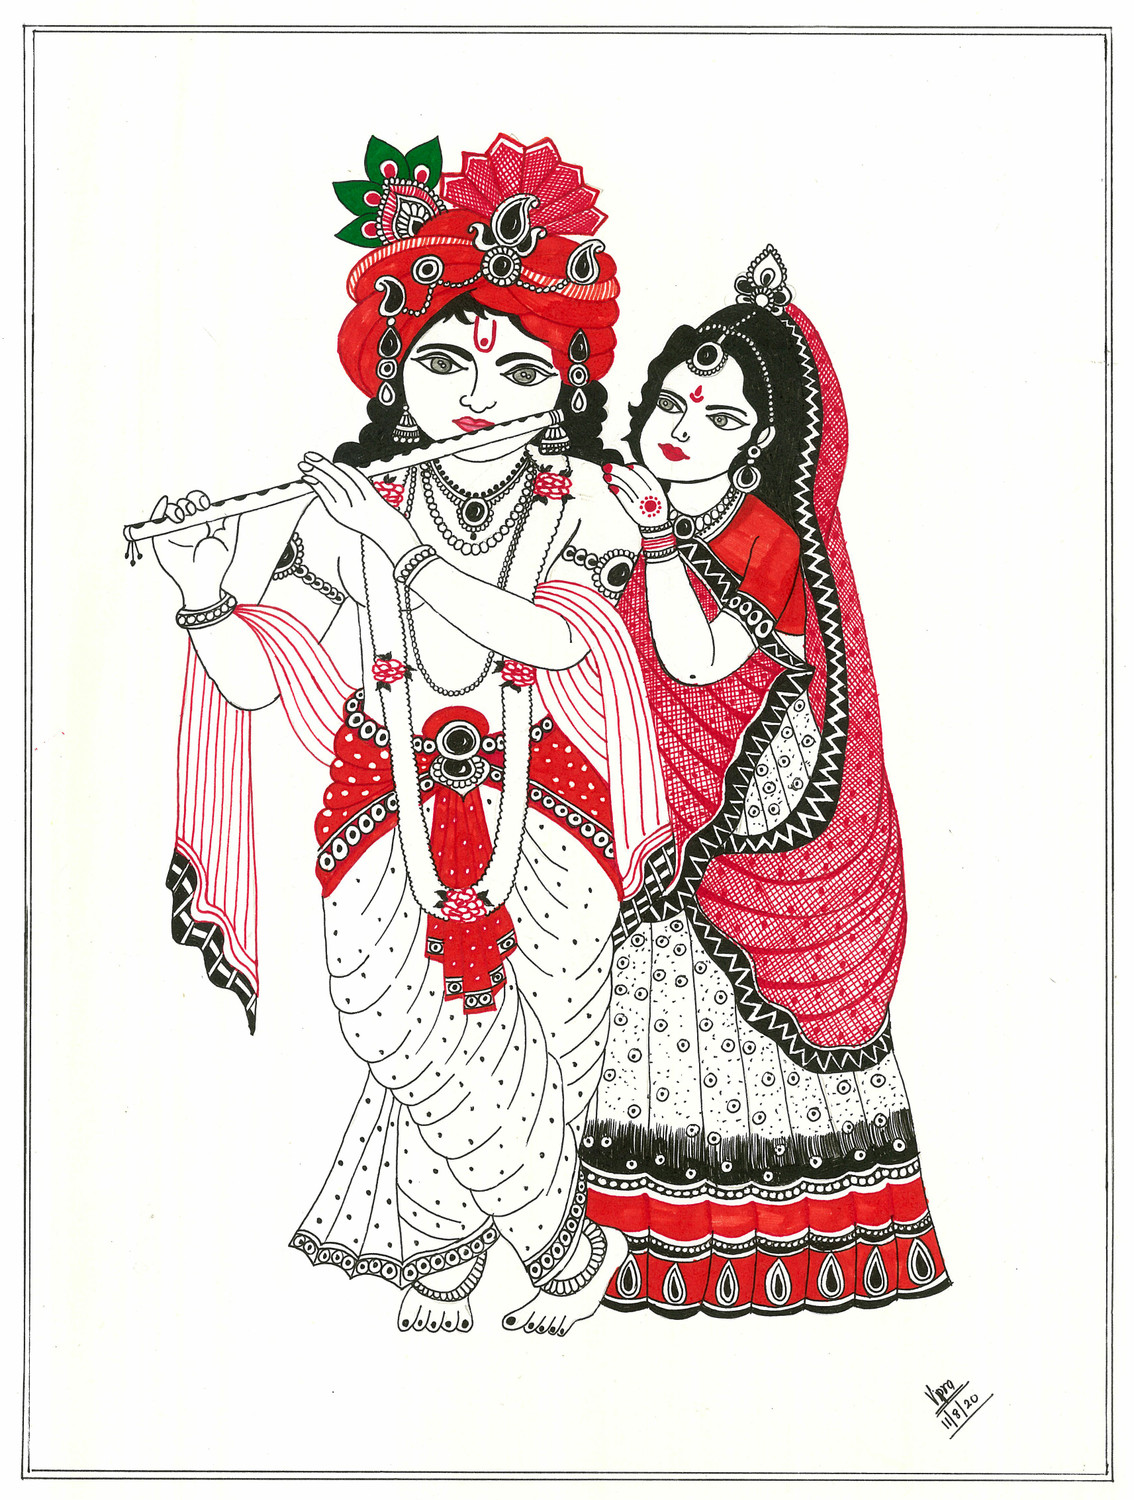 Radha Krishna Hand Vector: Over 360 Royalty-Free Licensable Stock  Illustrations & Drawings | Shutterstock